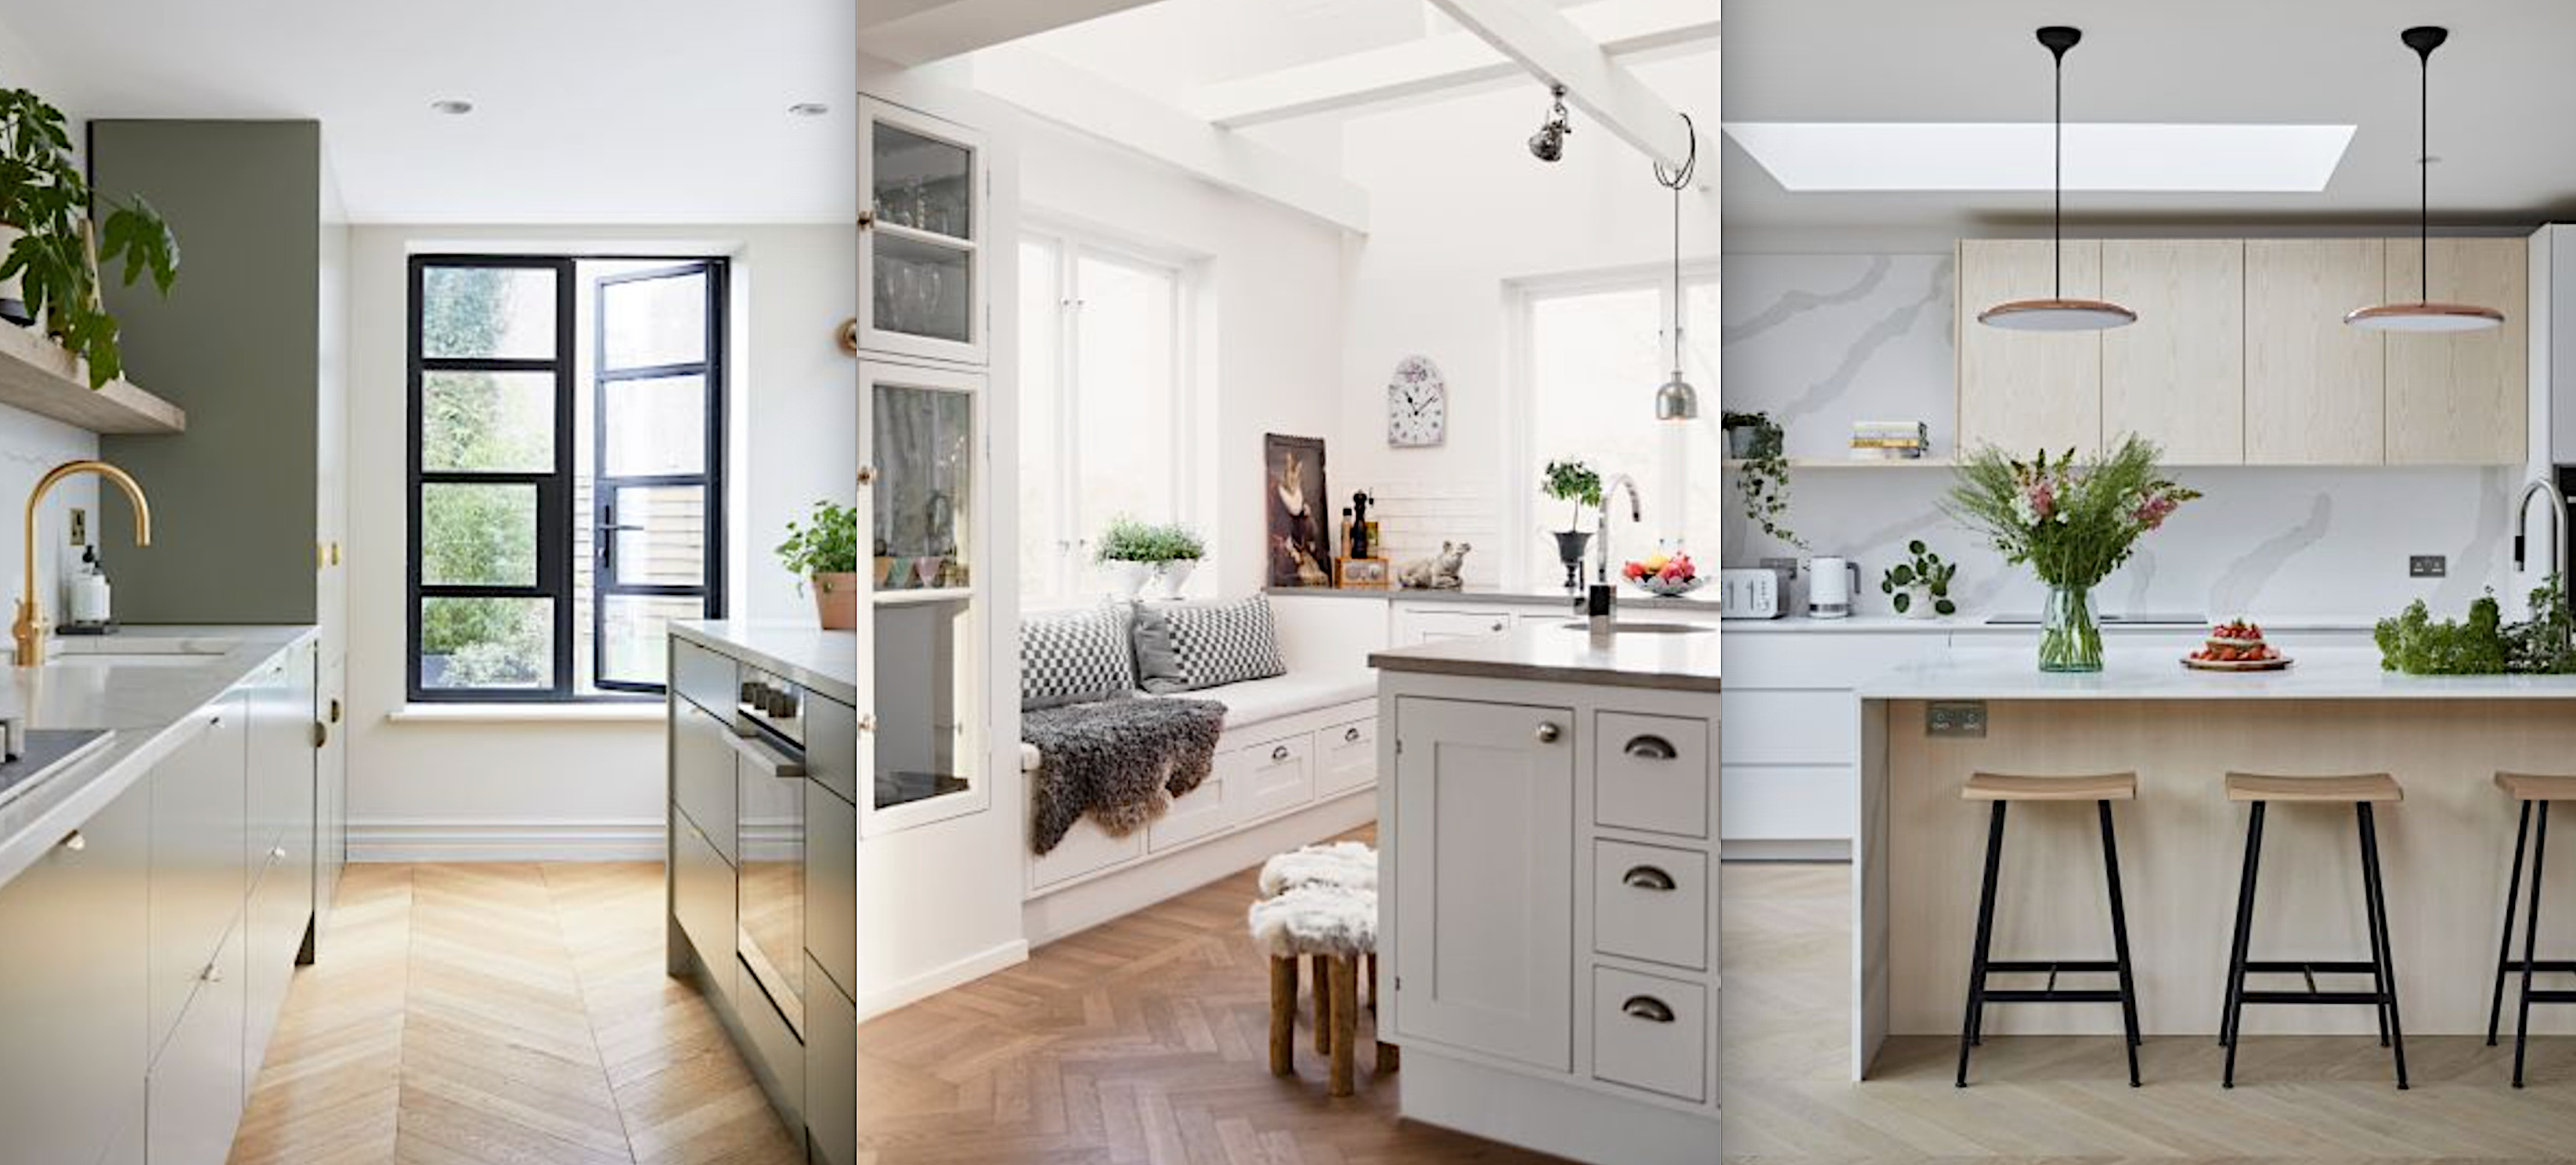 scandinavian kitchens: 20 ideas function and character |